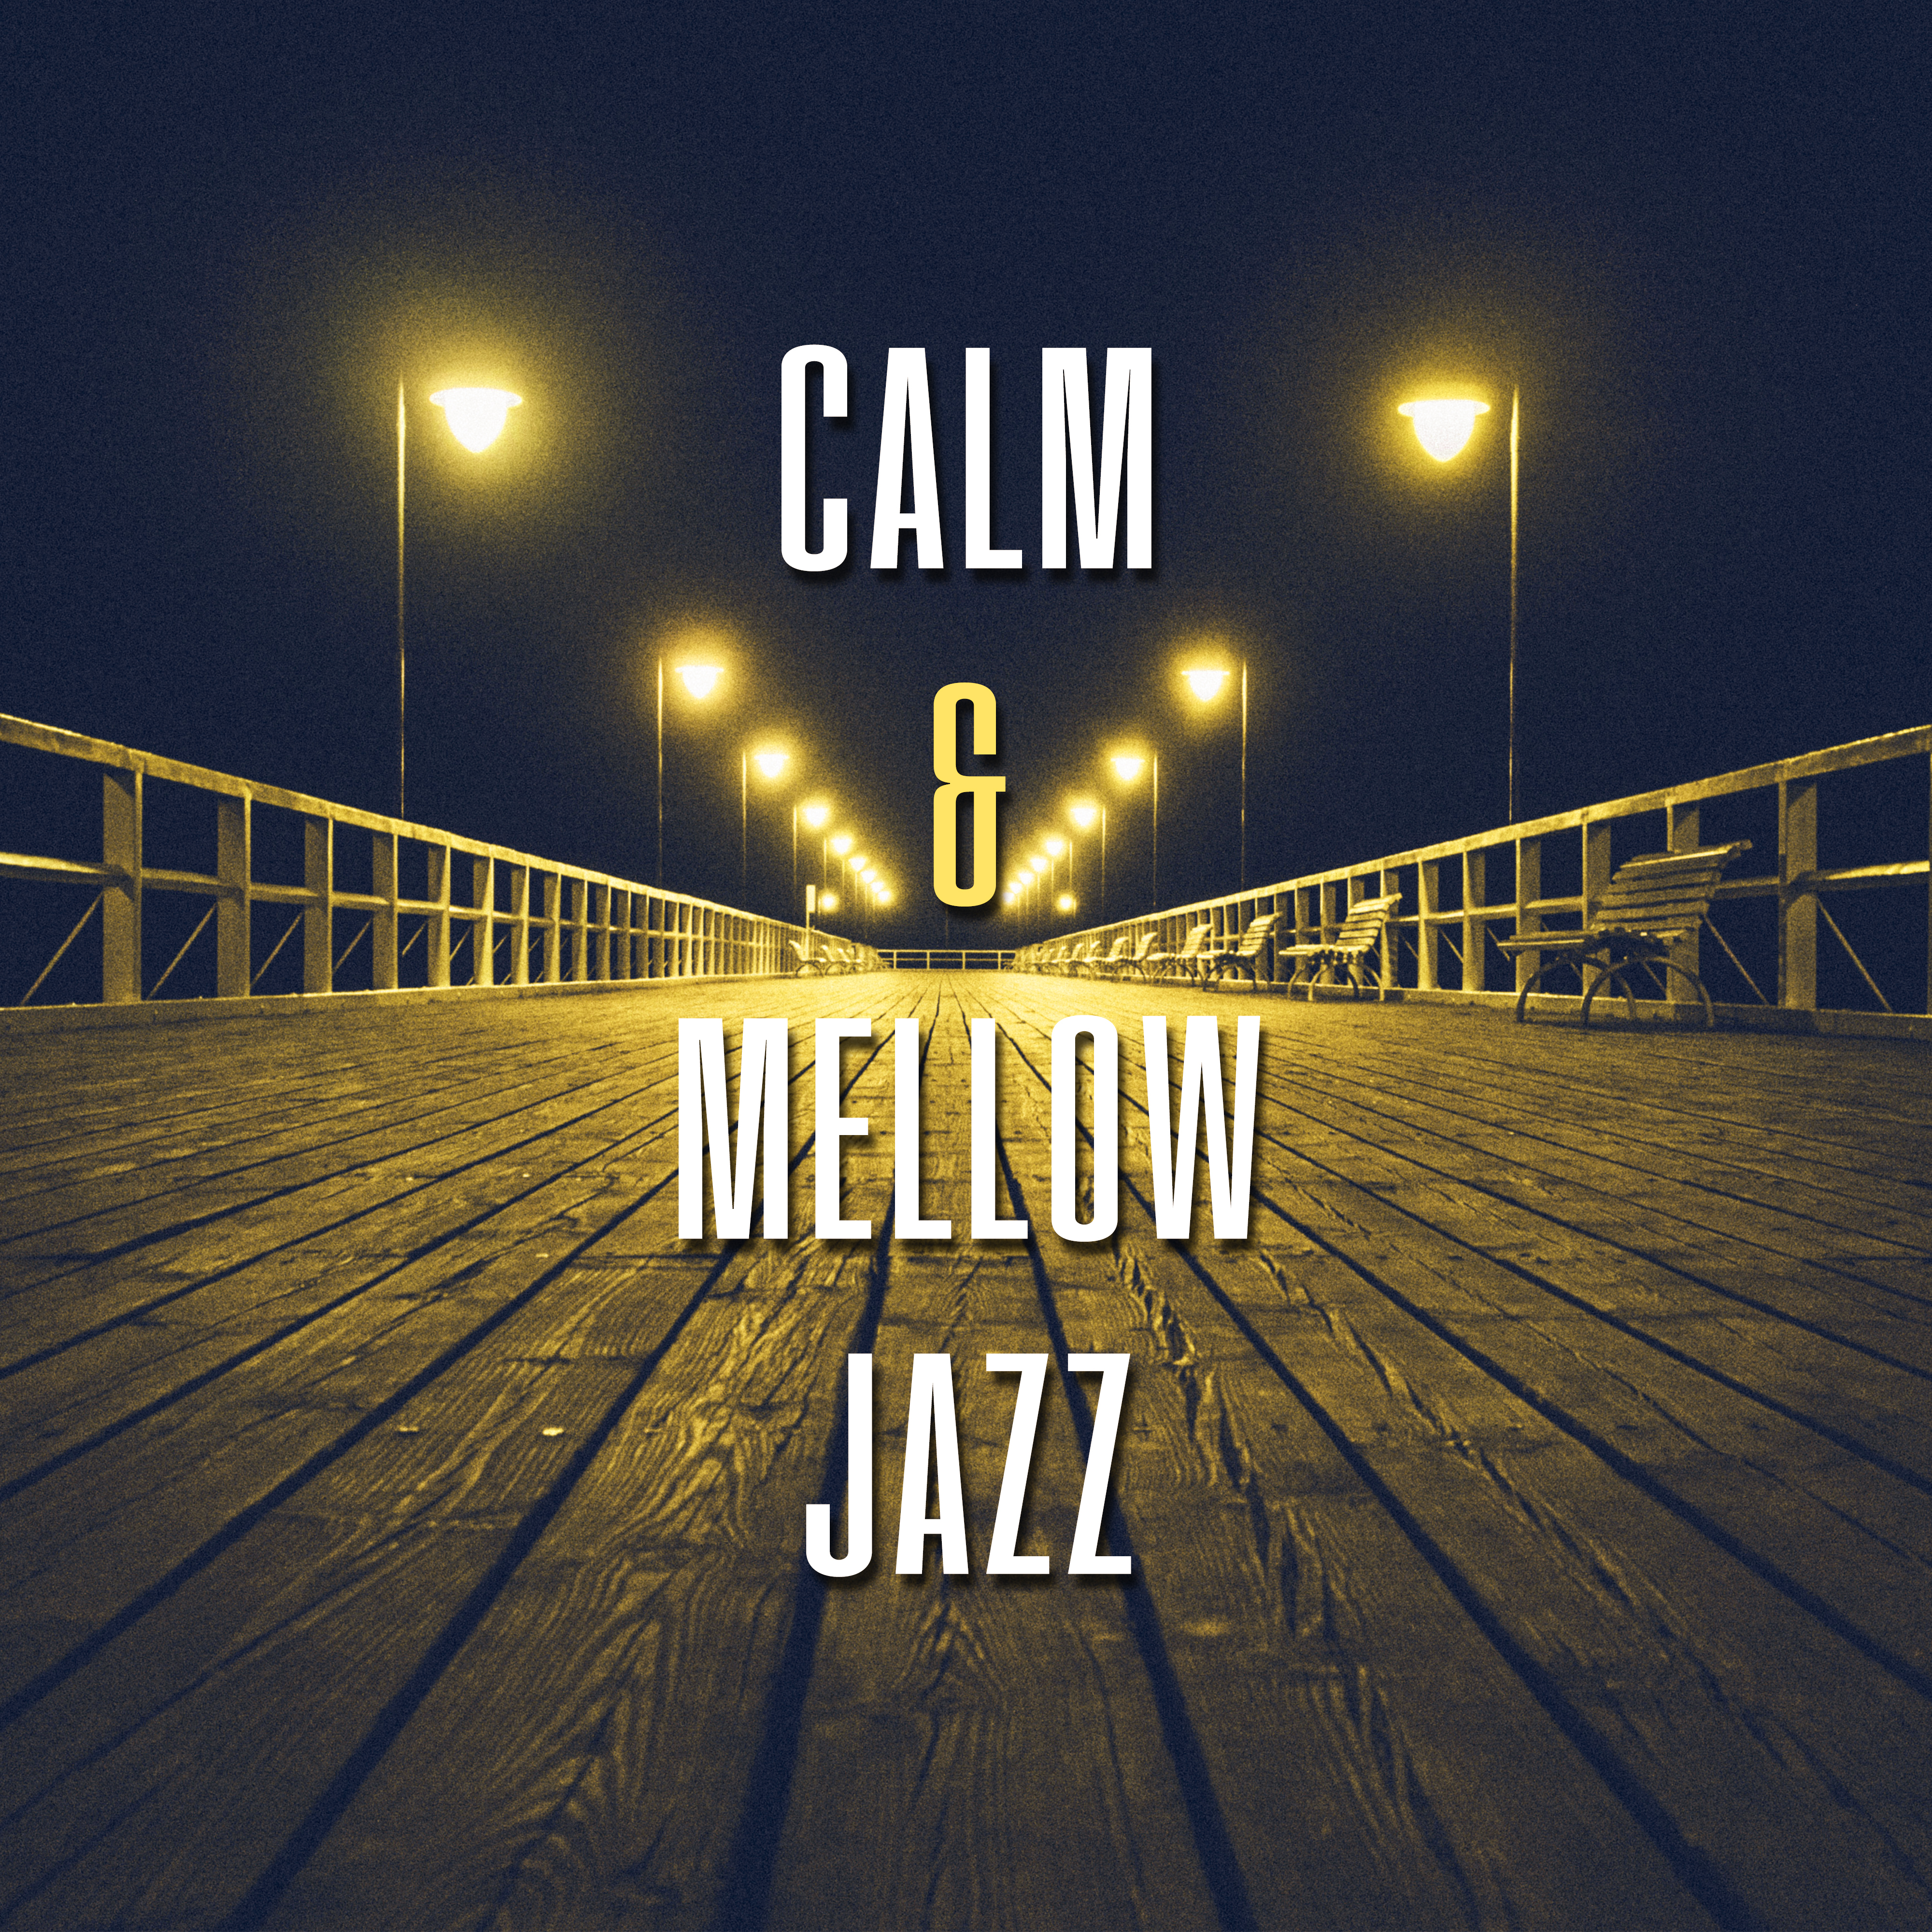 Calm  Mellow Jazz  Smooth Sounds to Relax, Rest with Jazz Music, Soft Piano Music, Moon Jazz